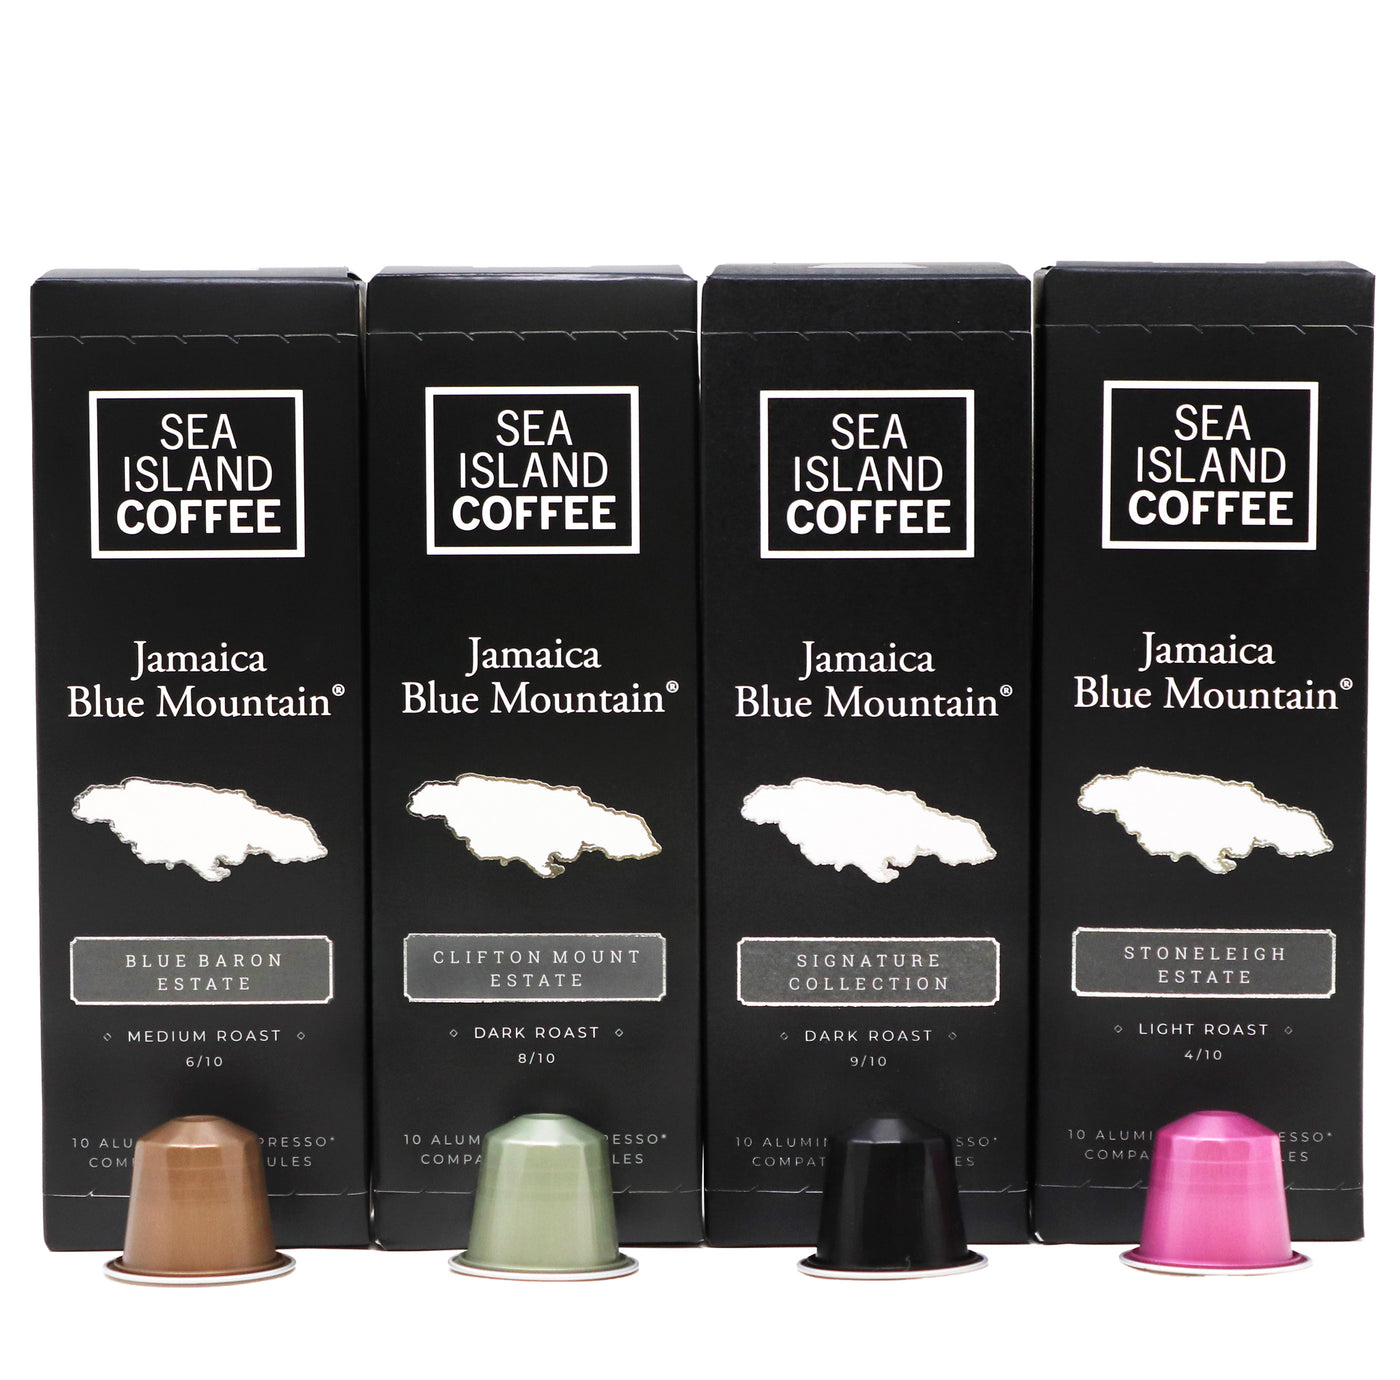 Four boxes of black Nespresso compatible Jamaica Blue Mountain coffee pods